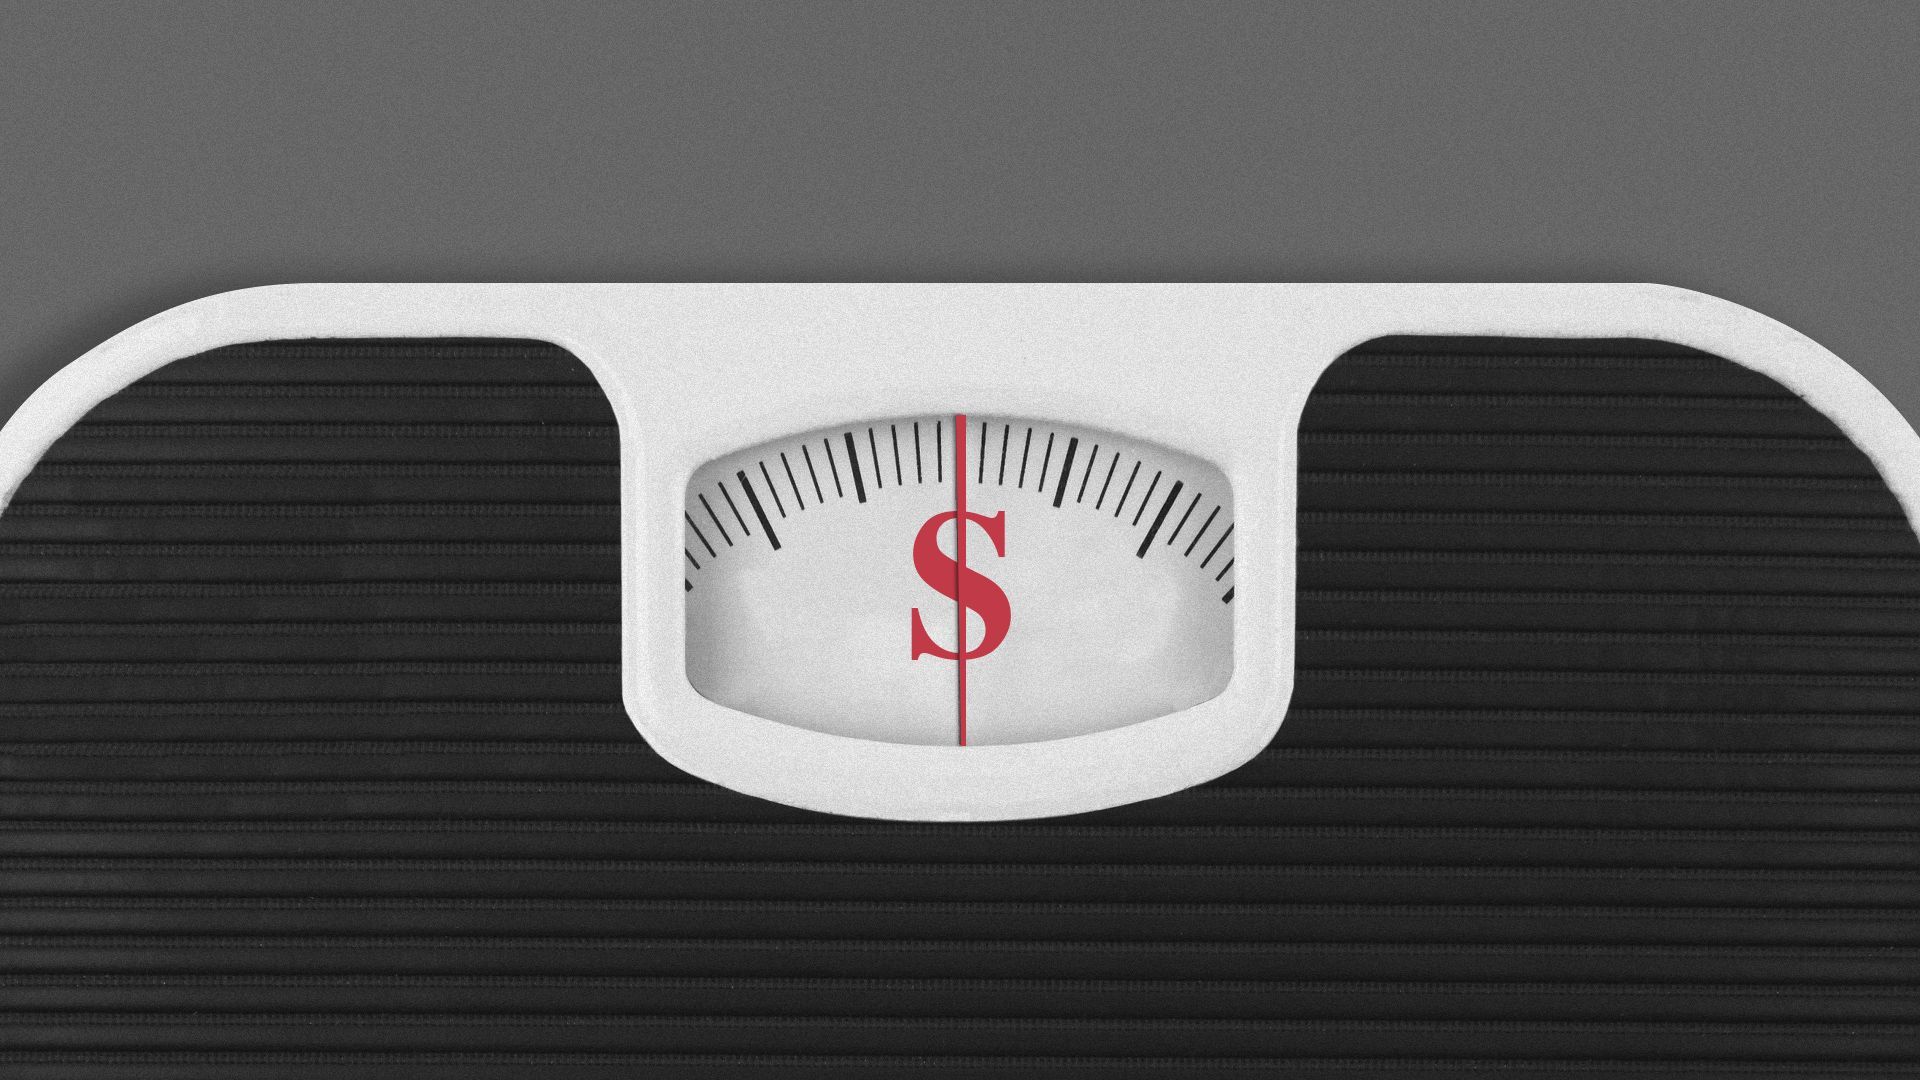 Illustration of a bathroom scale with a dollar sign formed by the indicator in the weight scale window. 